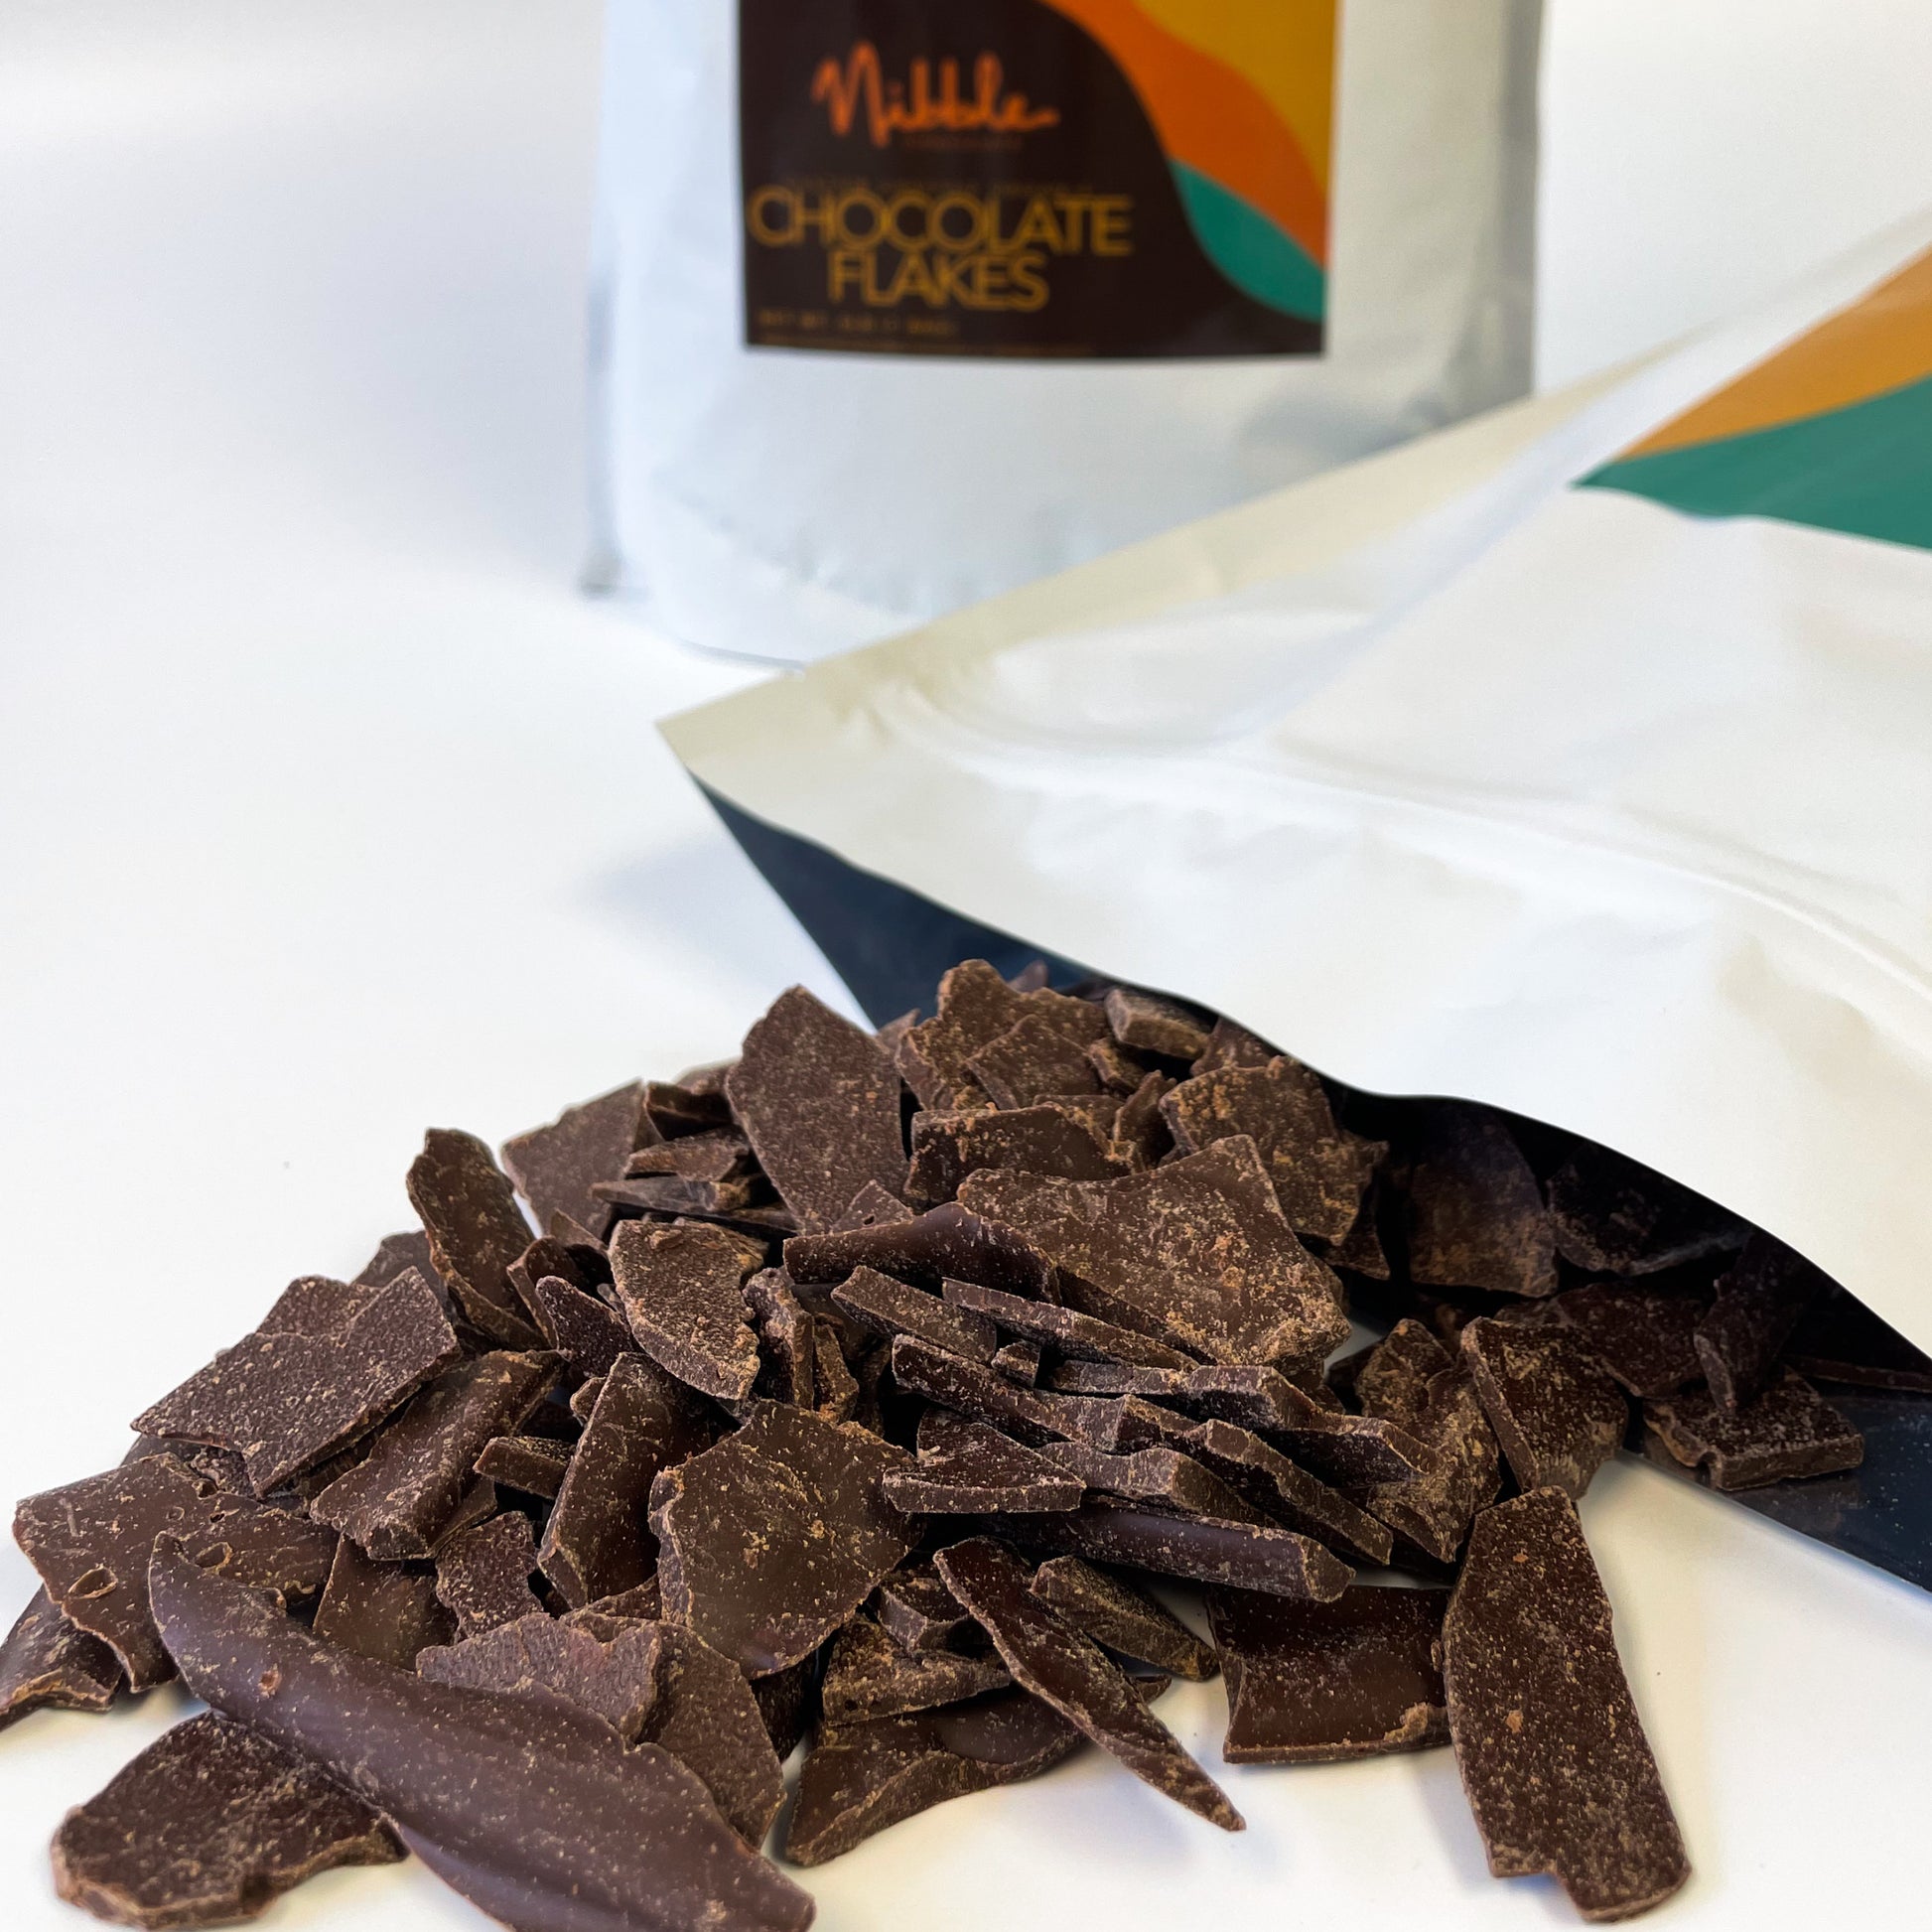 Wholesale Cocktail Time - Boozy vegan dark chocolate truffles for your  store